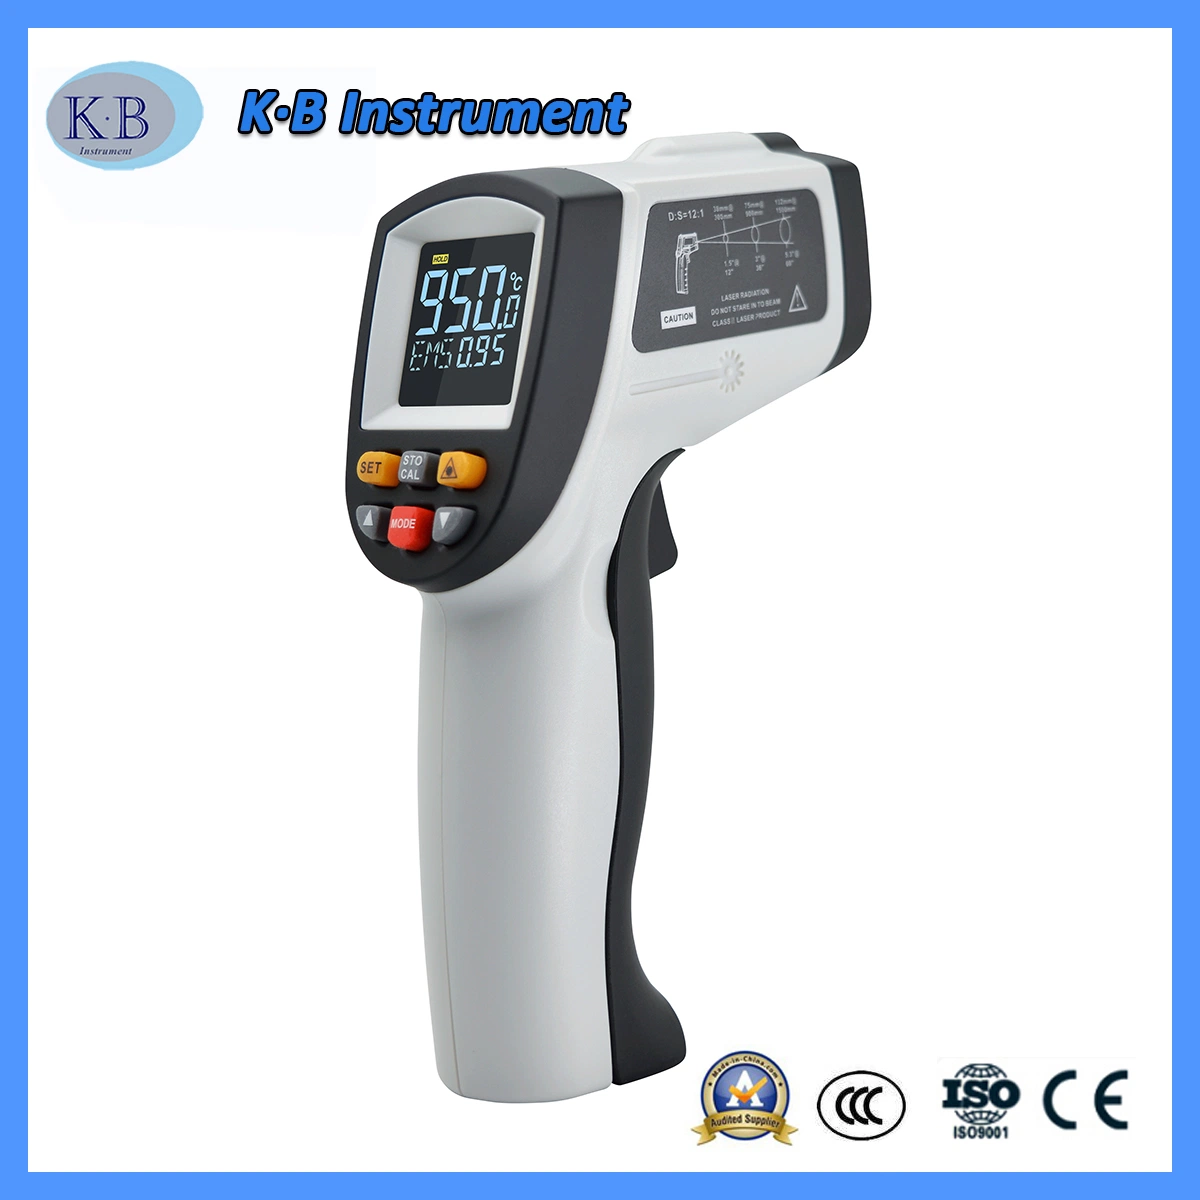 Digital Non-Contact High Temperature Infrared Thermometer (GT950)